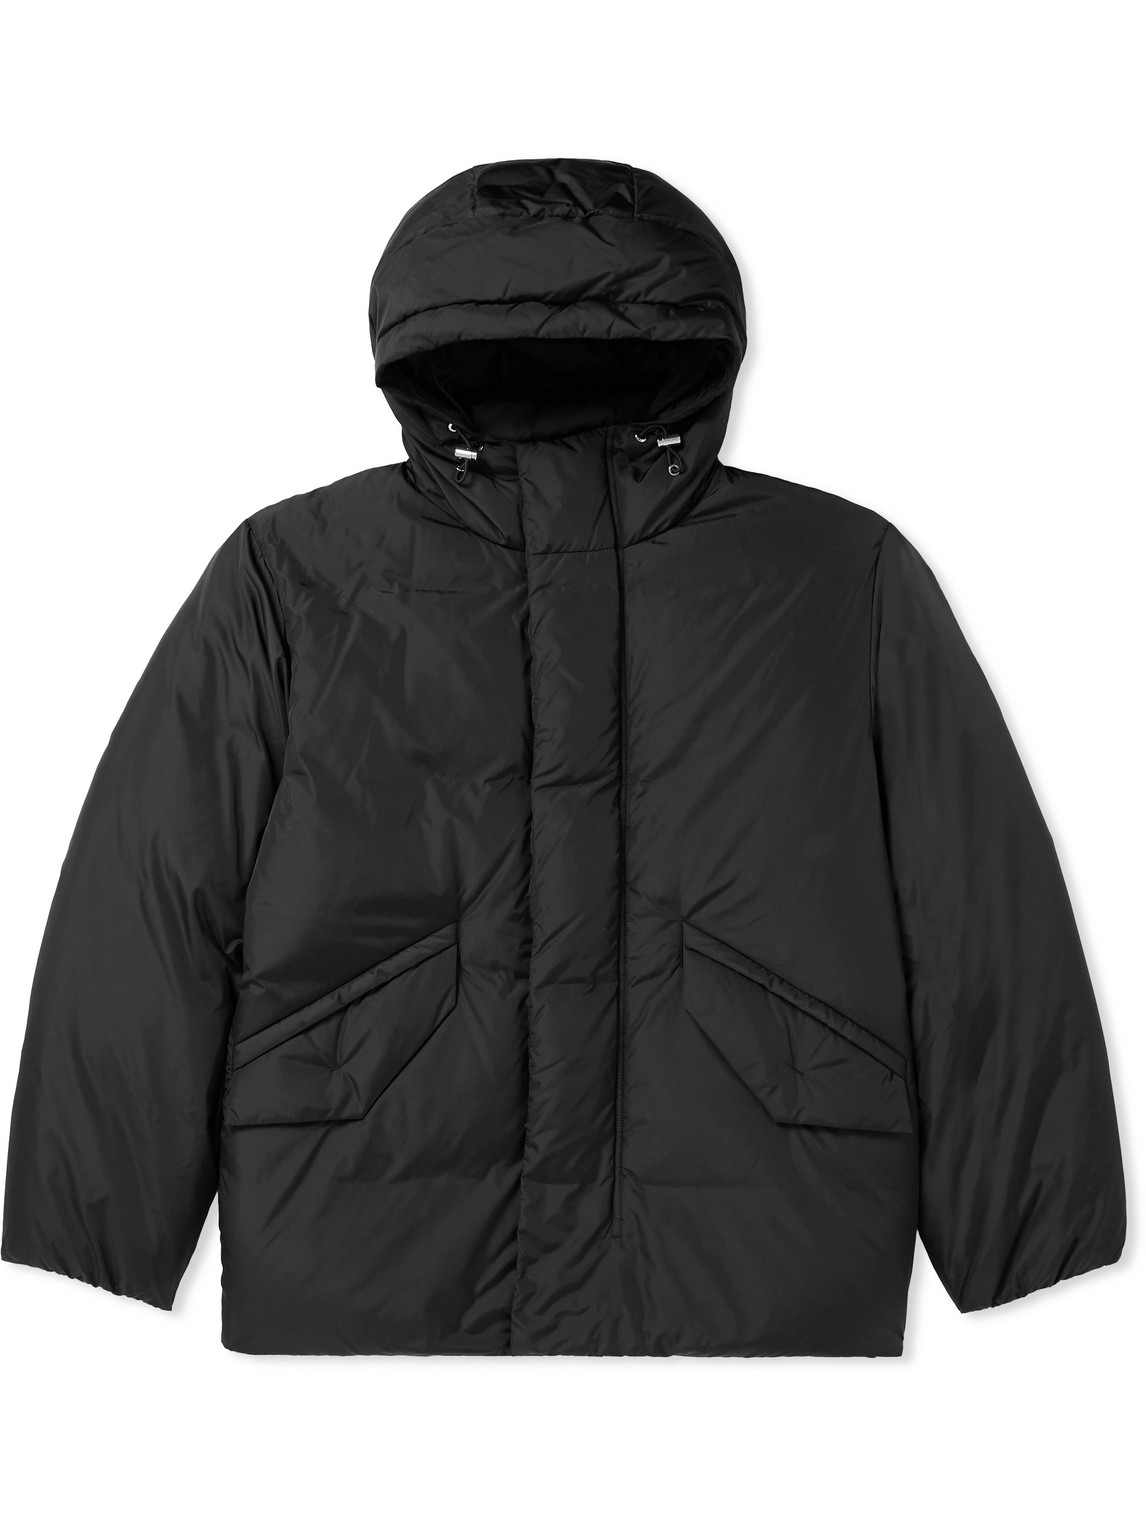 Theory - Liston Quilted Recycled-Shell Hooded Down Jacket - Men - Black - S von Theory